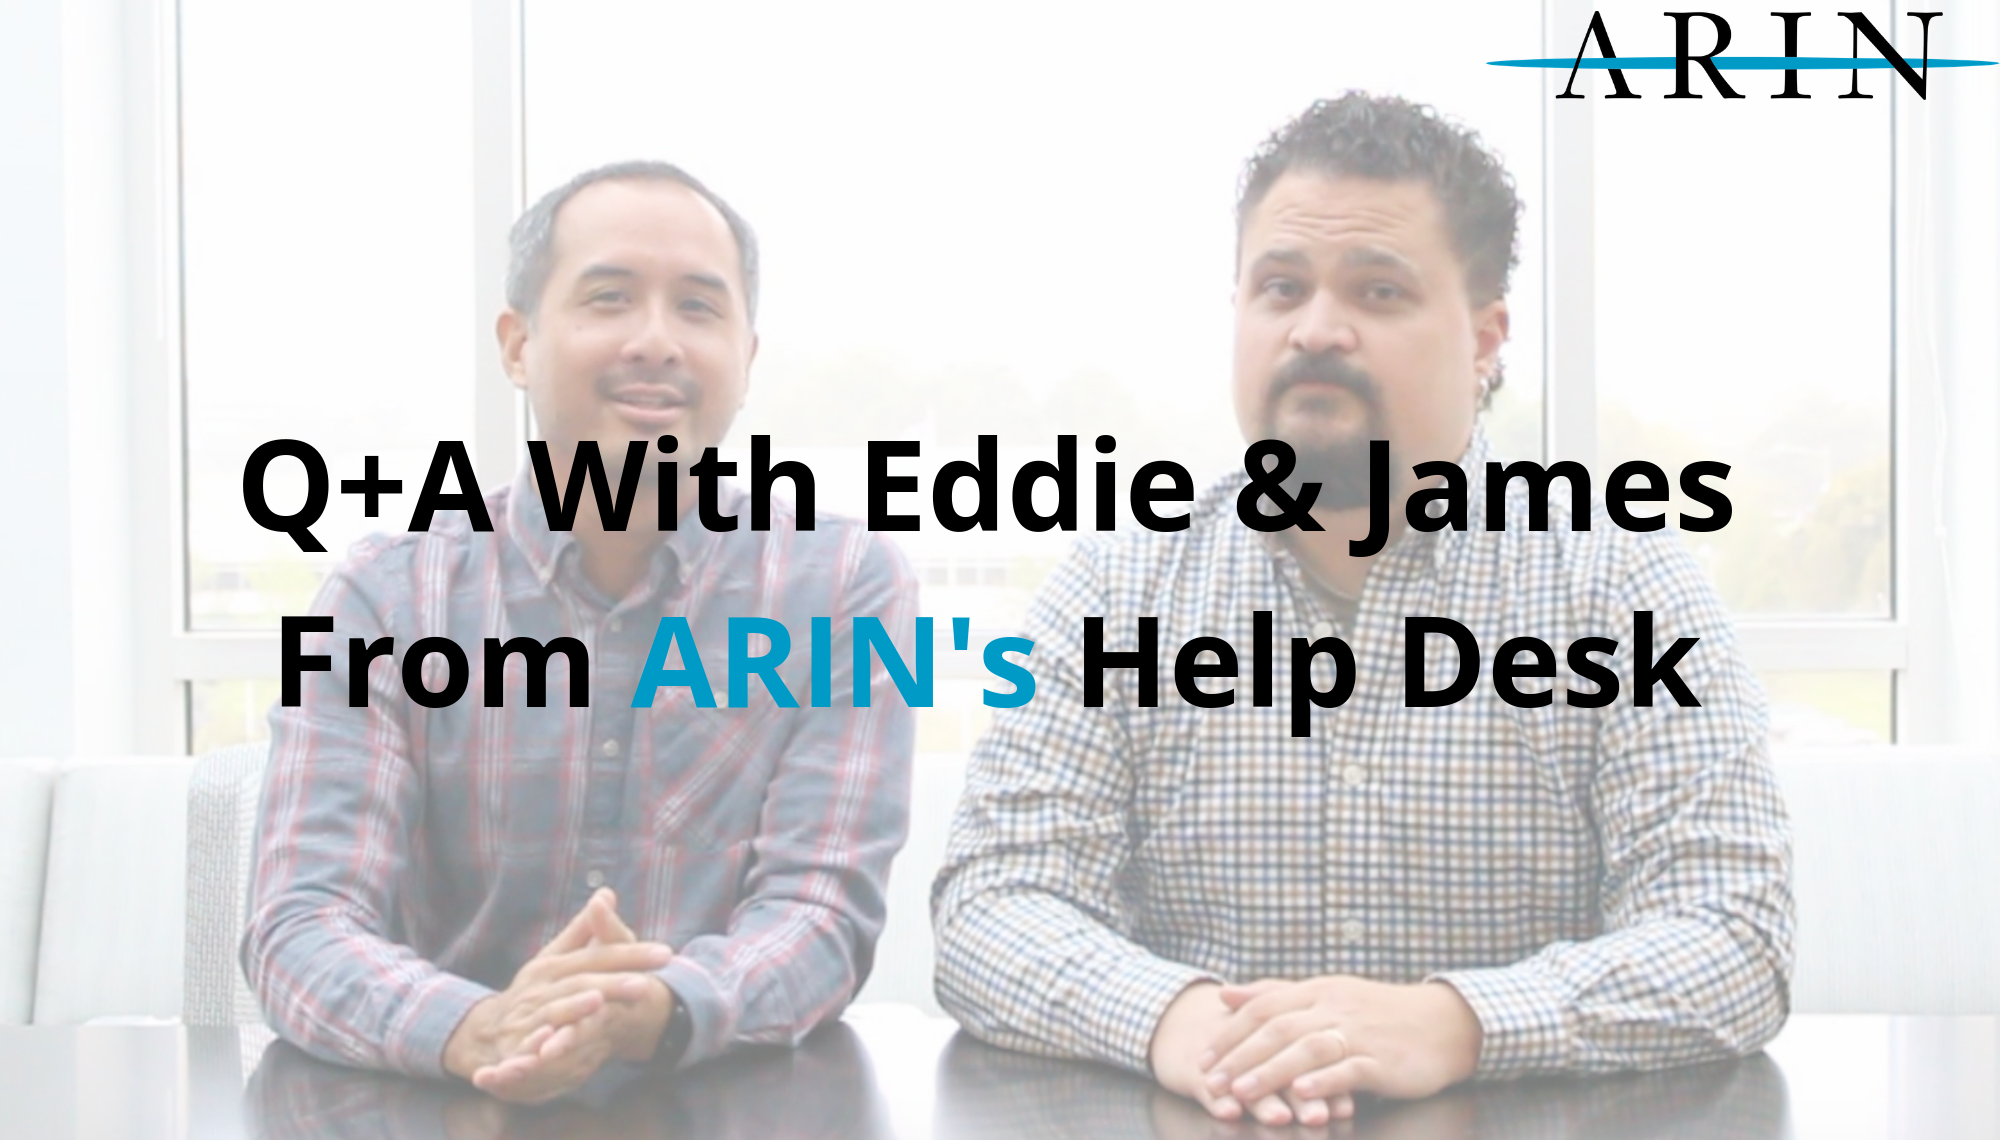 Q+A With Eddie and James From ARIN’s Help Desk